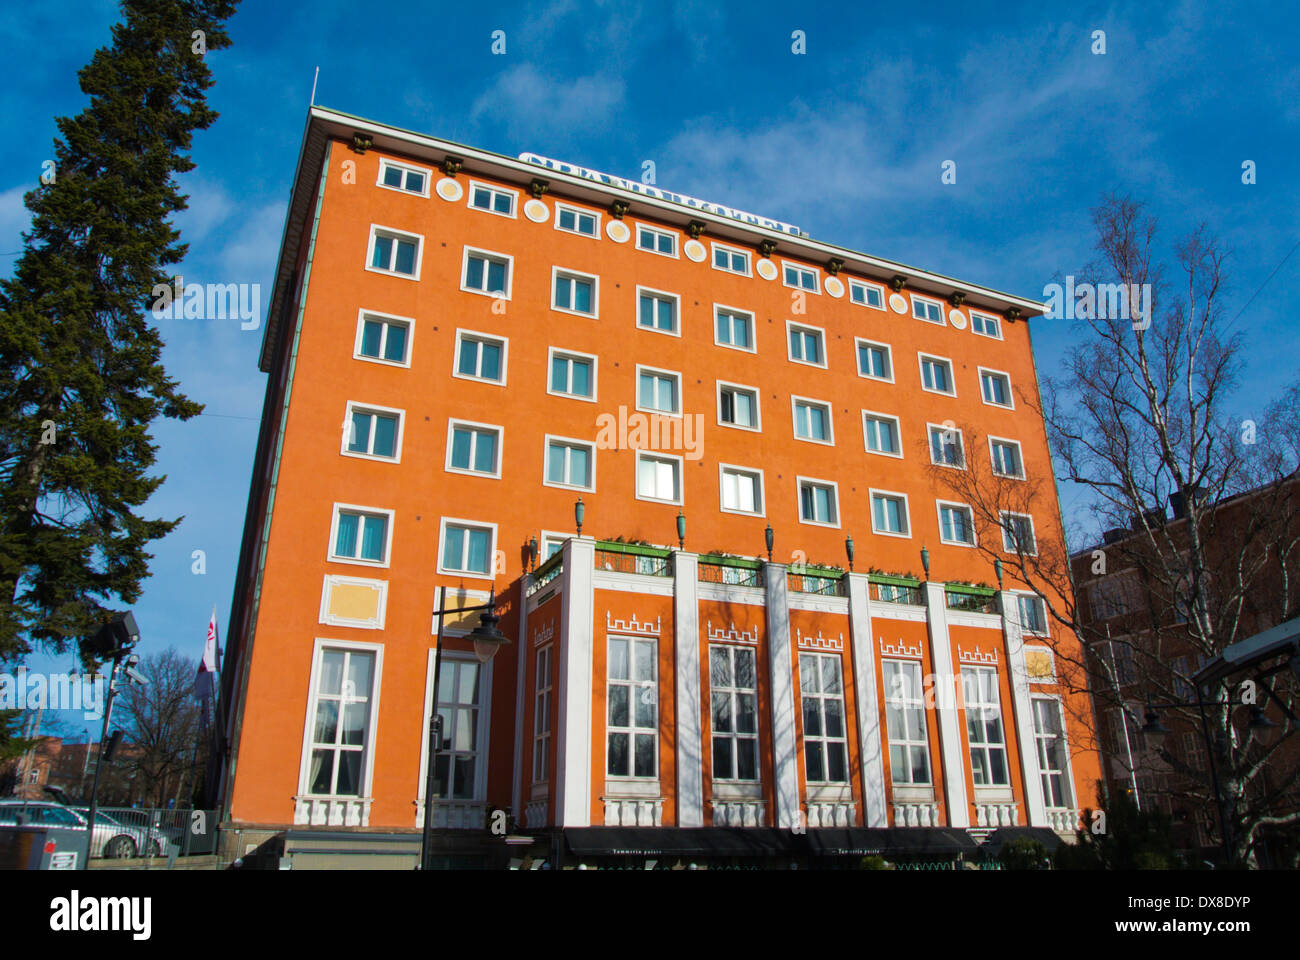 Grand Hotel Tammer, now Sokos chain hotel, Koskipuisto park, central Tampere, central Finland, Europe Stock Photo